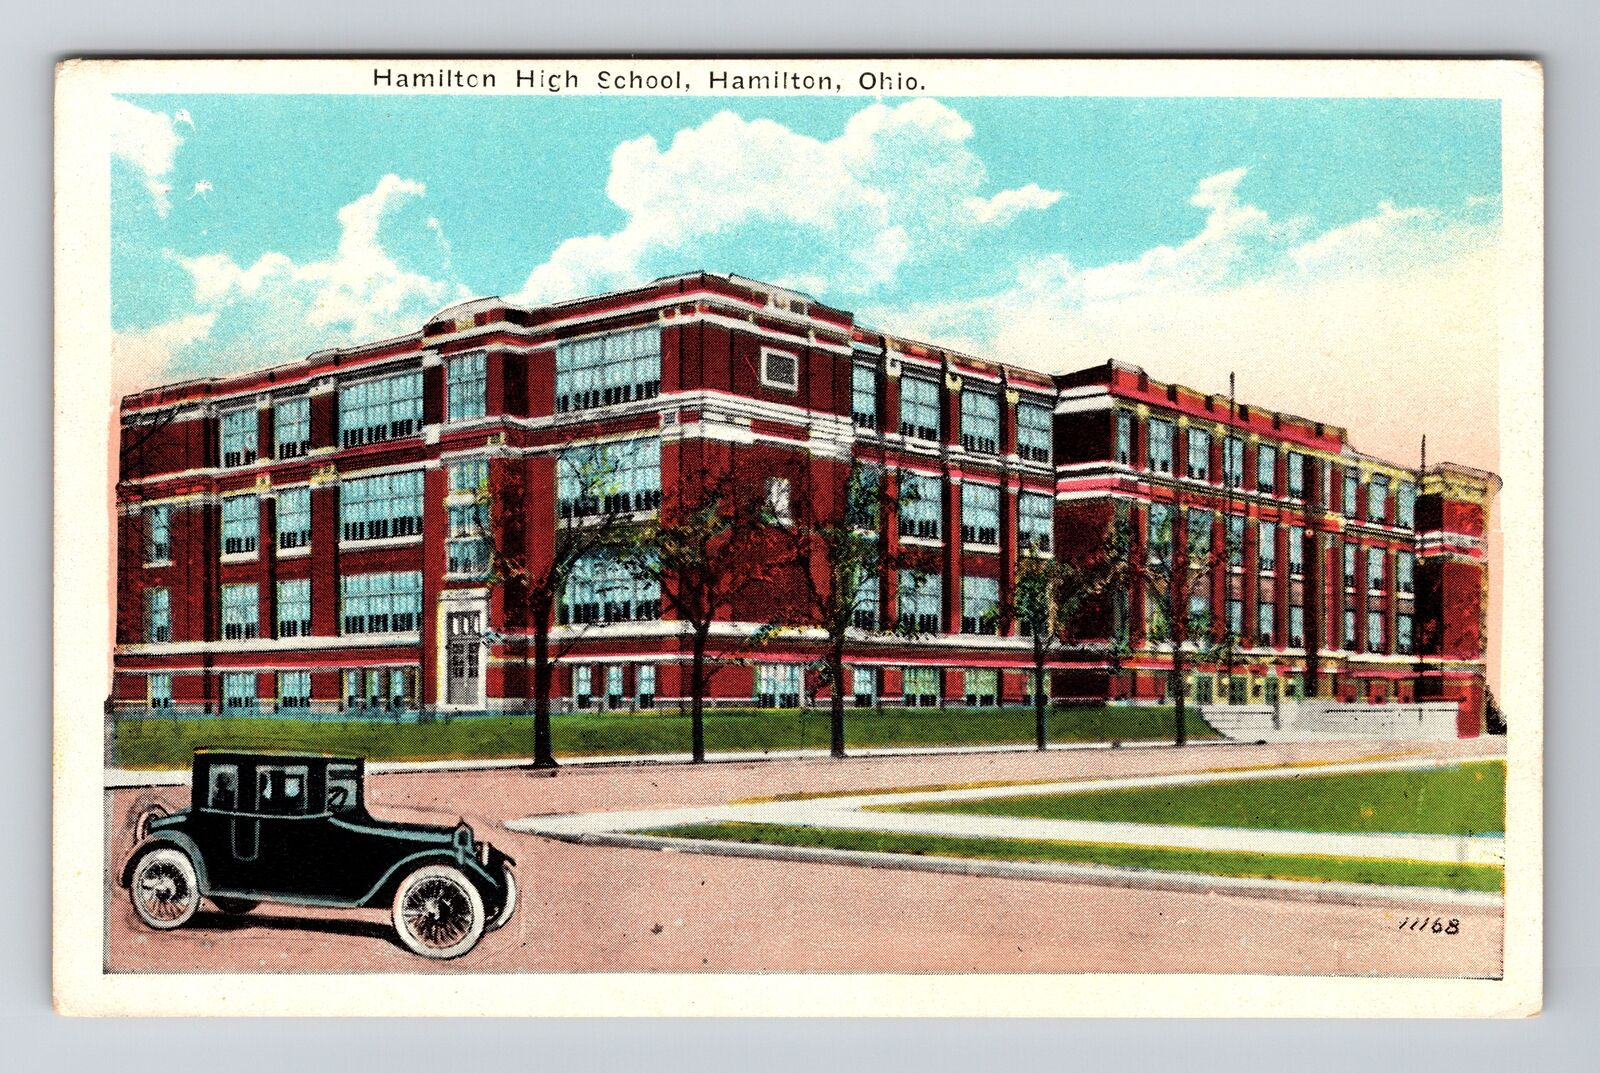 Hamilton OH-Ohio, High School Building, Old Car Driving by, Vintage Postcard